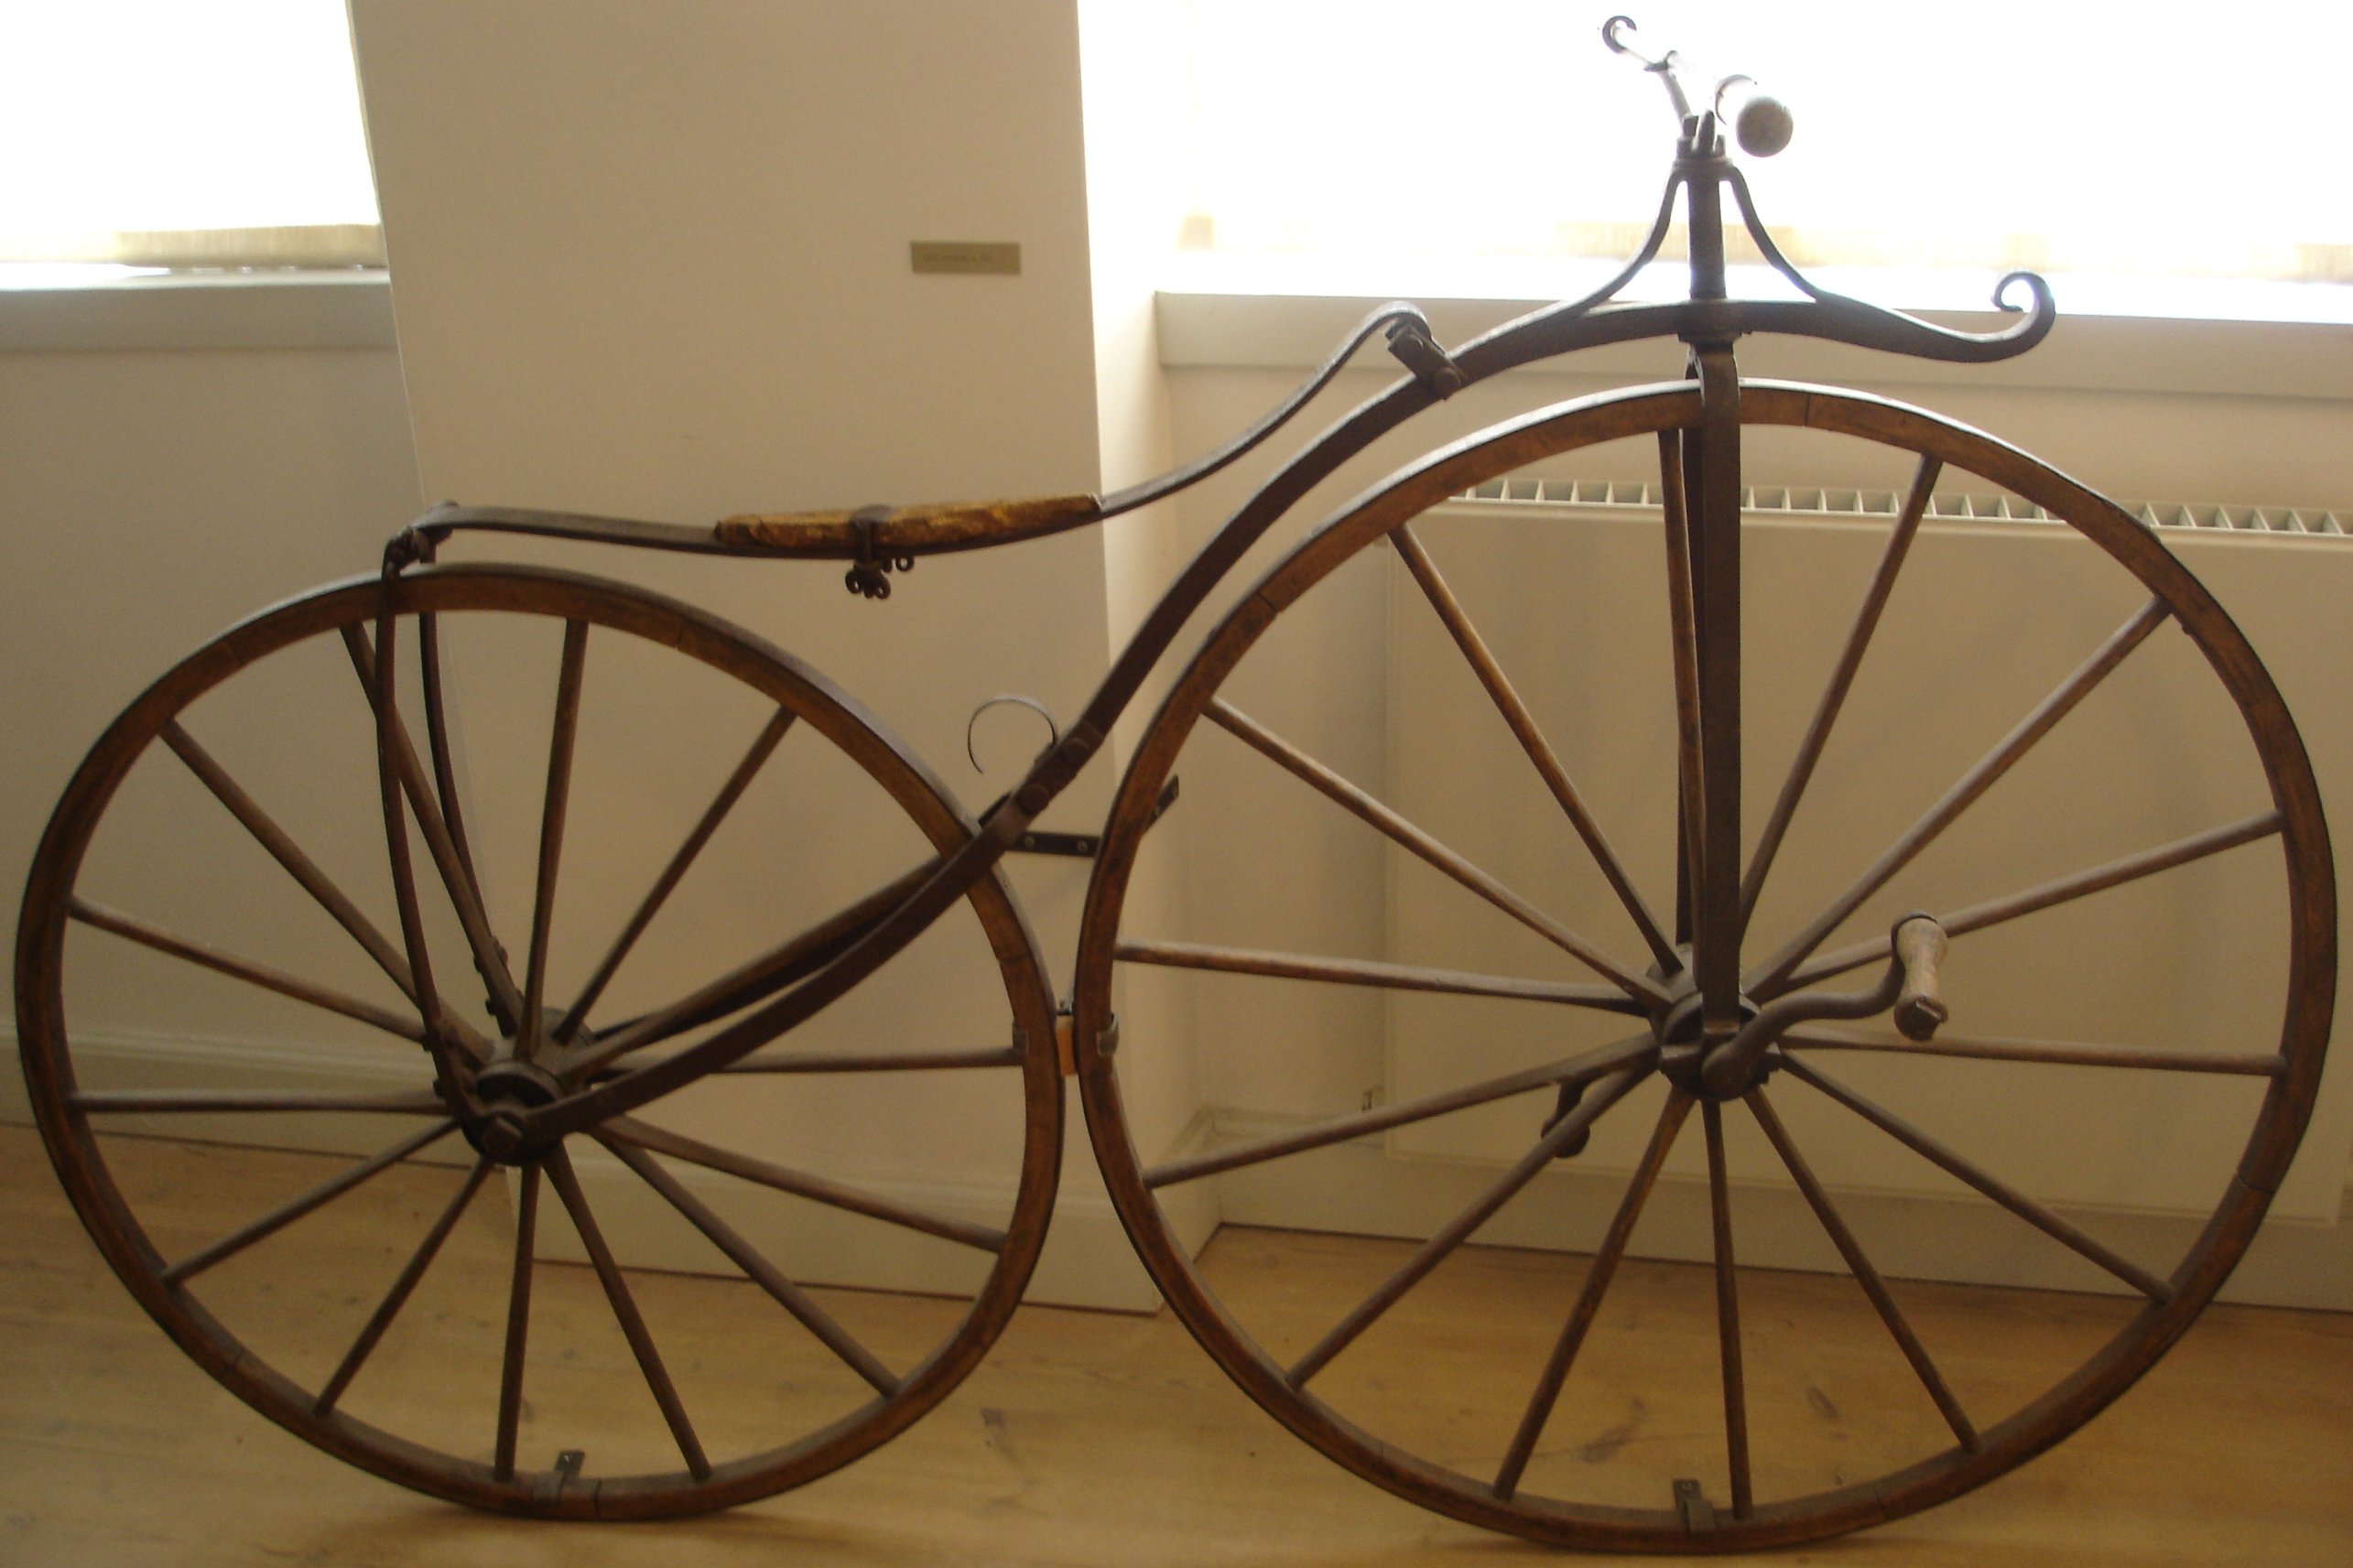 http://dic.academic.ru/pictures/wiki/files/66/Bicycle_1865.jpg